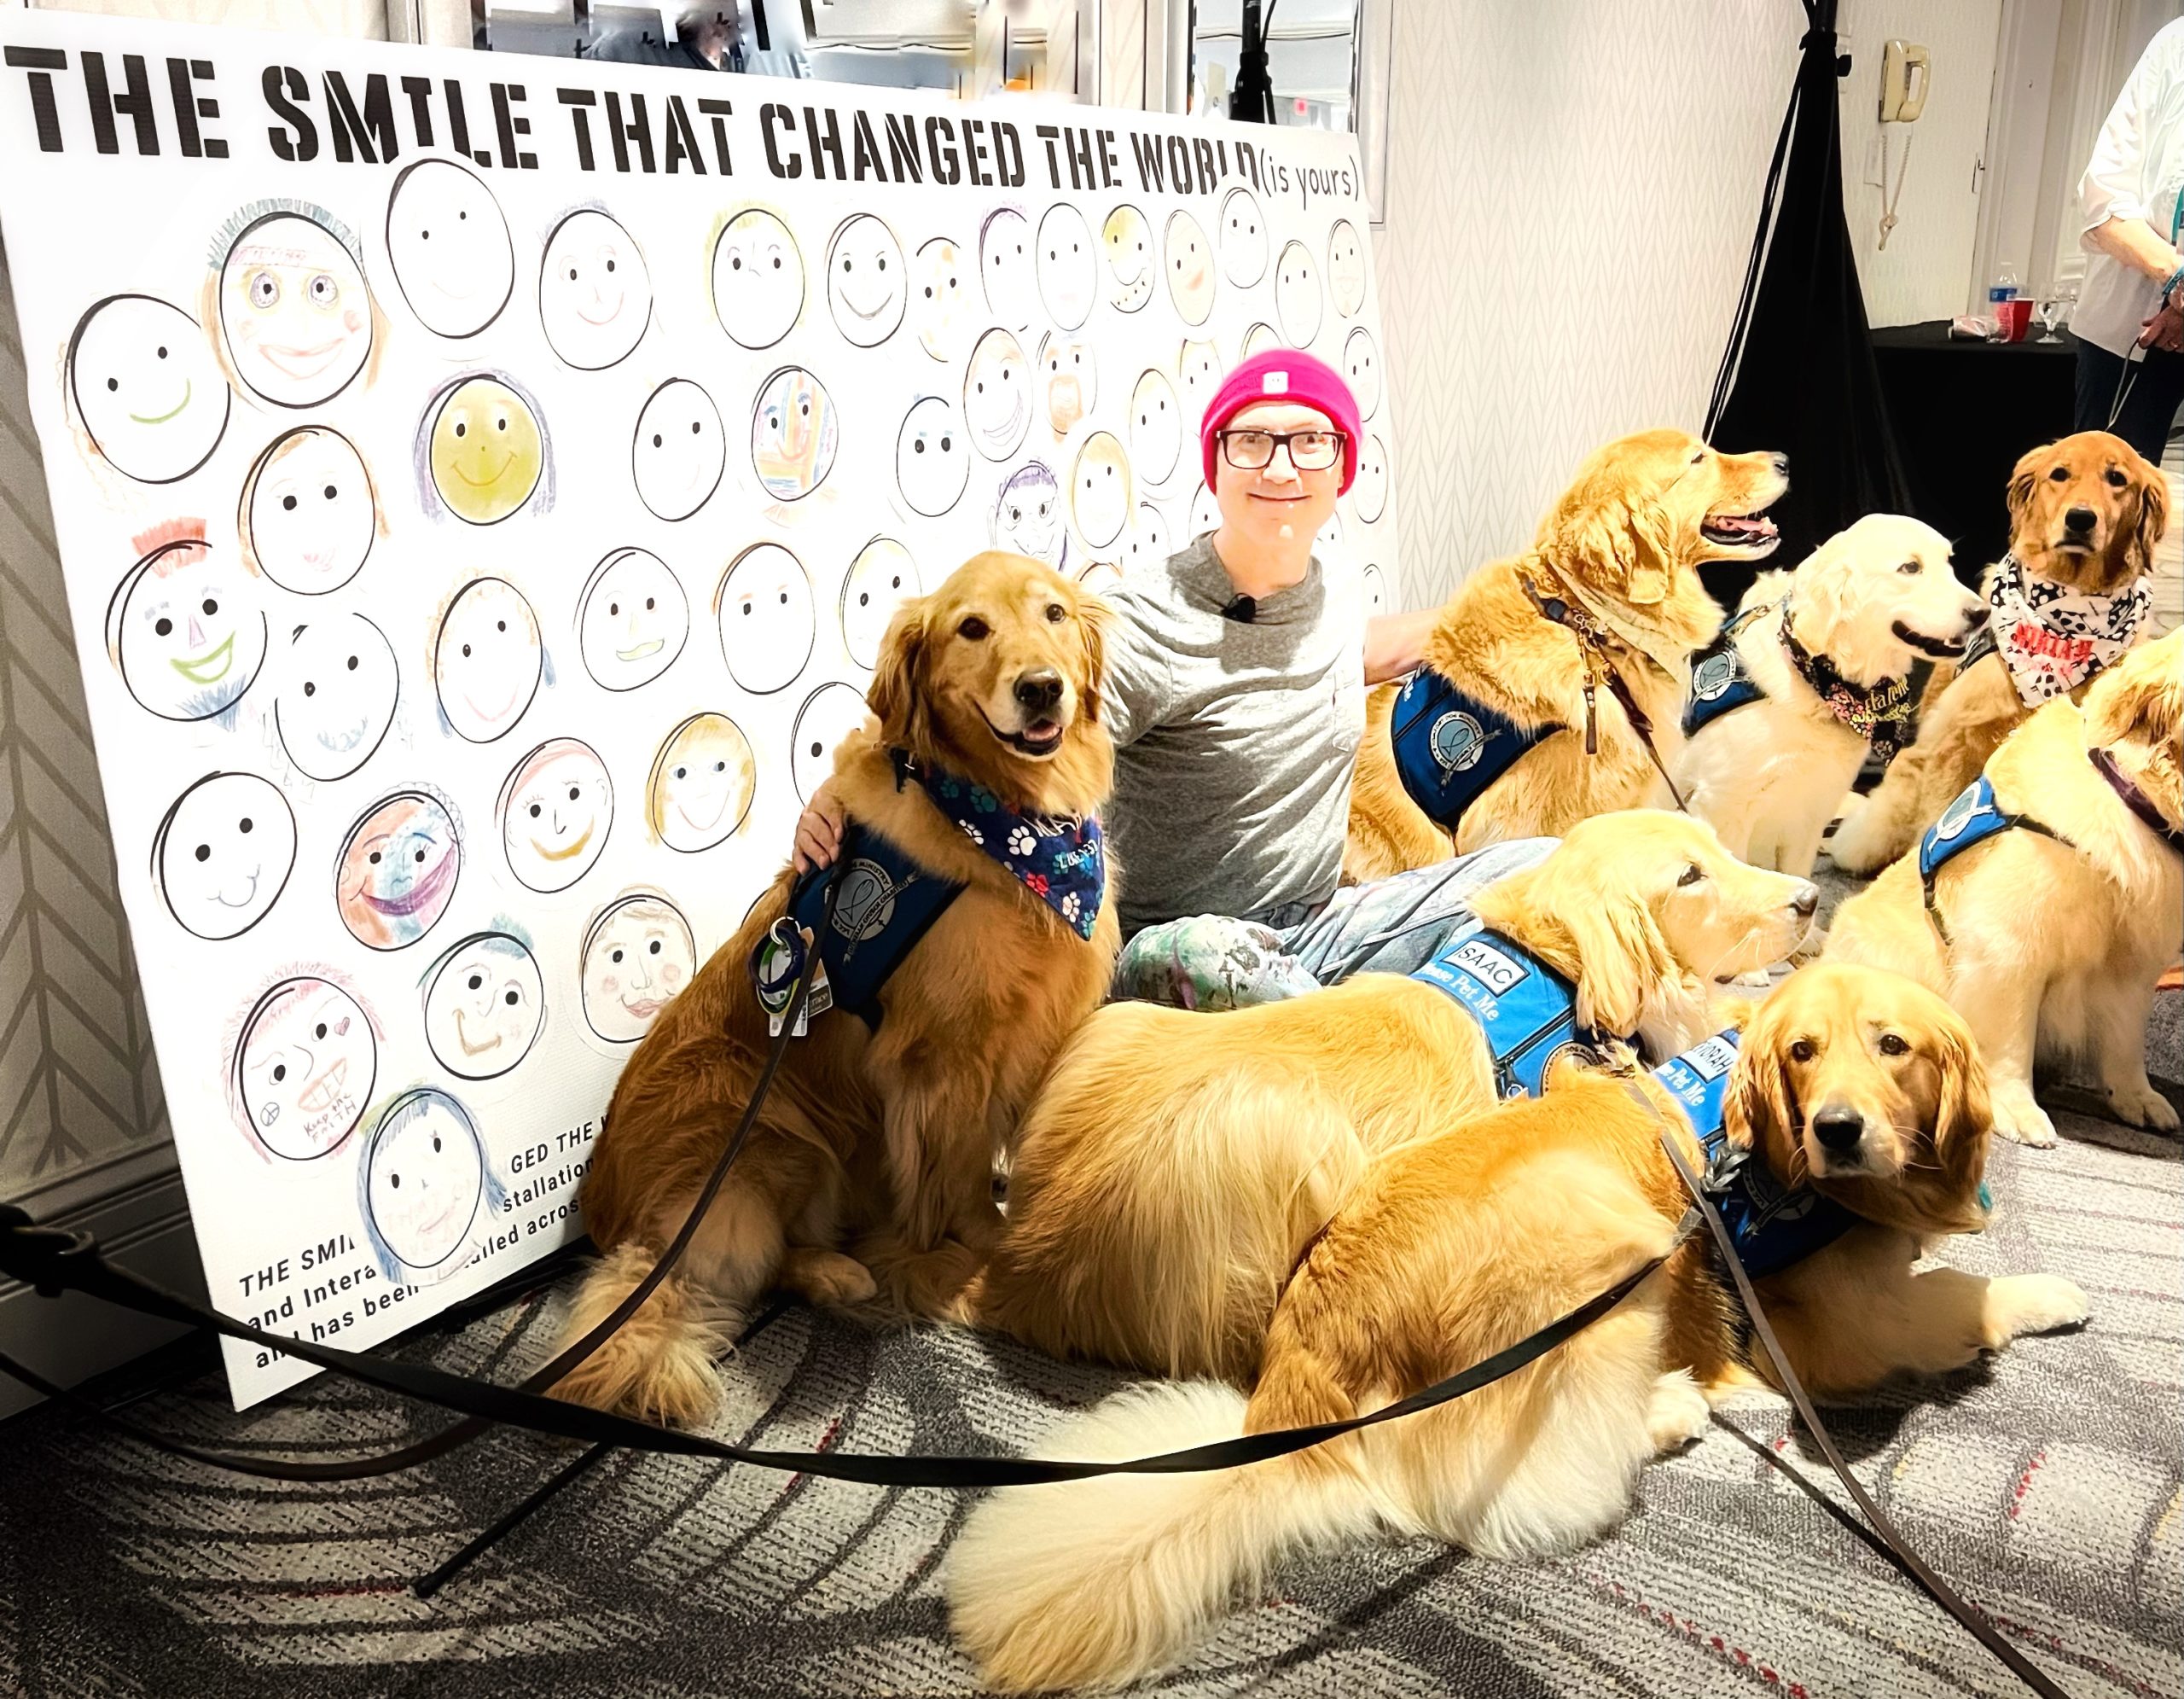 THE SMILE Installation at the LCC K-9 Comfort Dogs National Conference